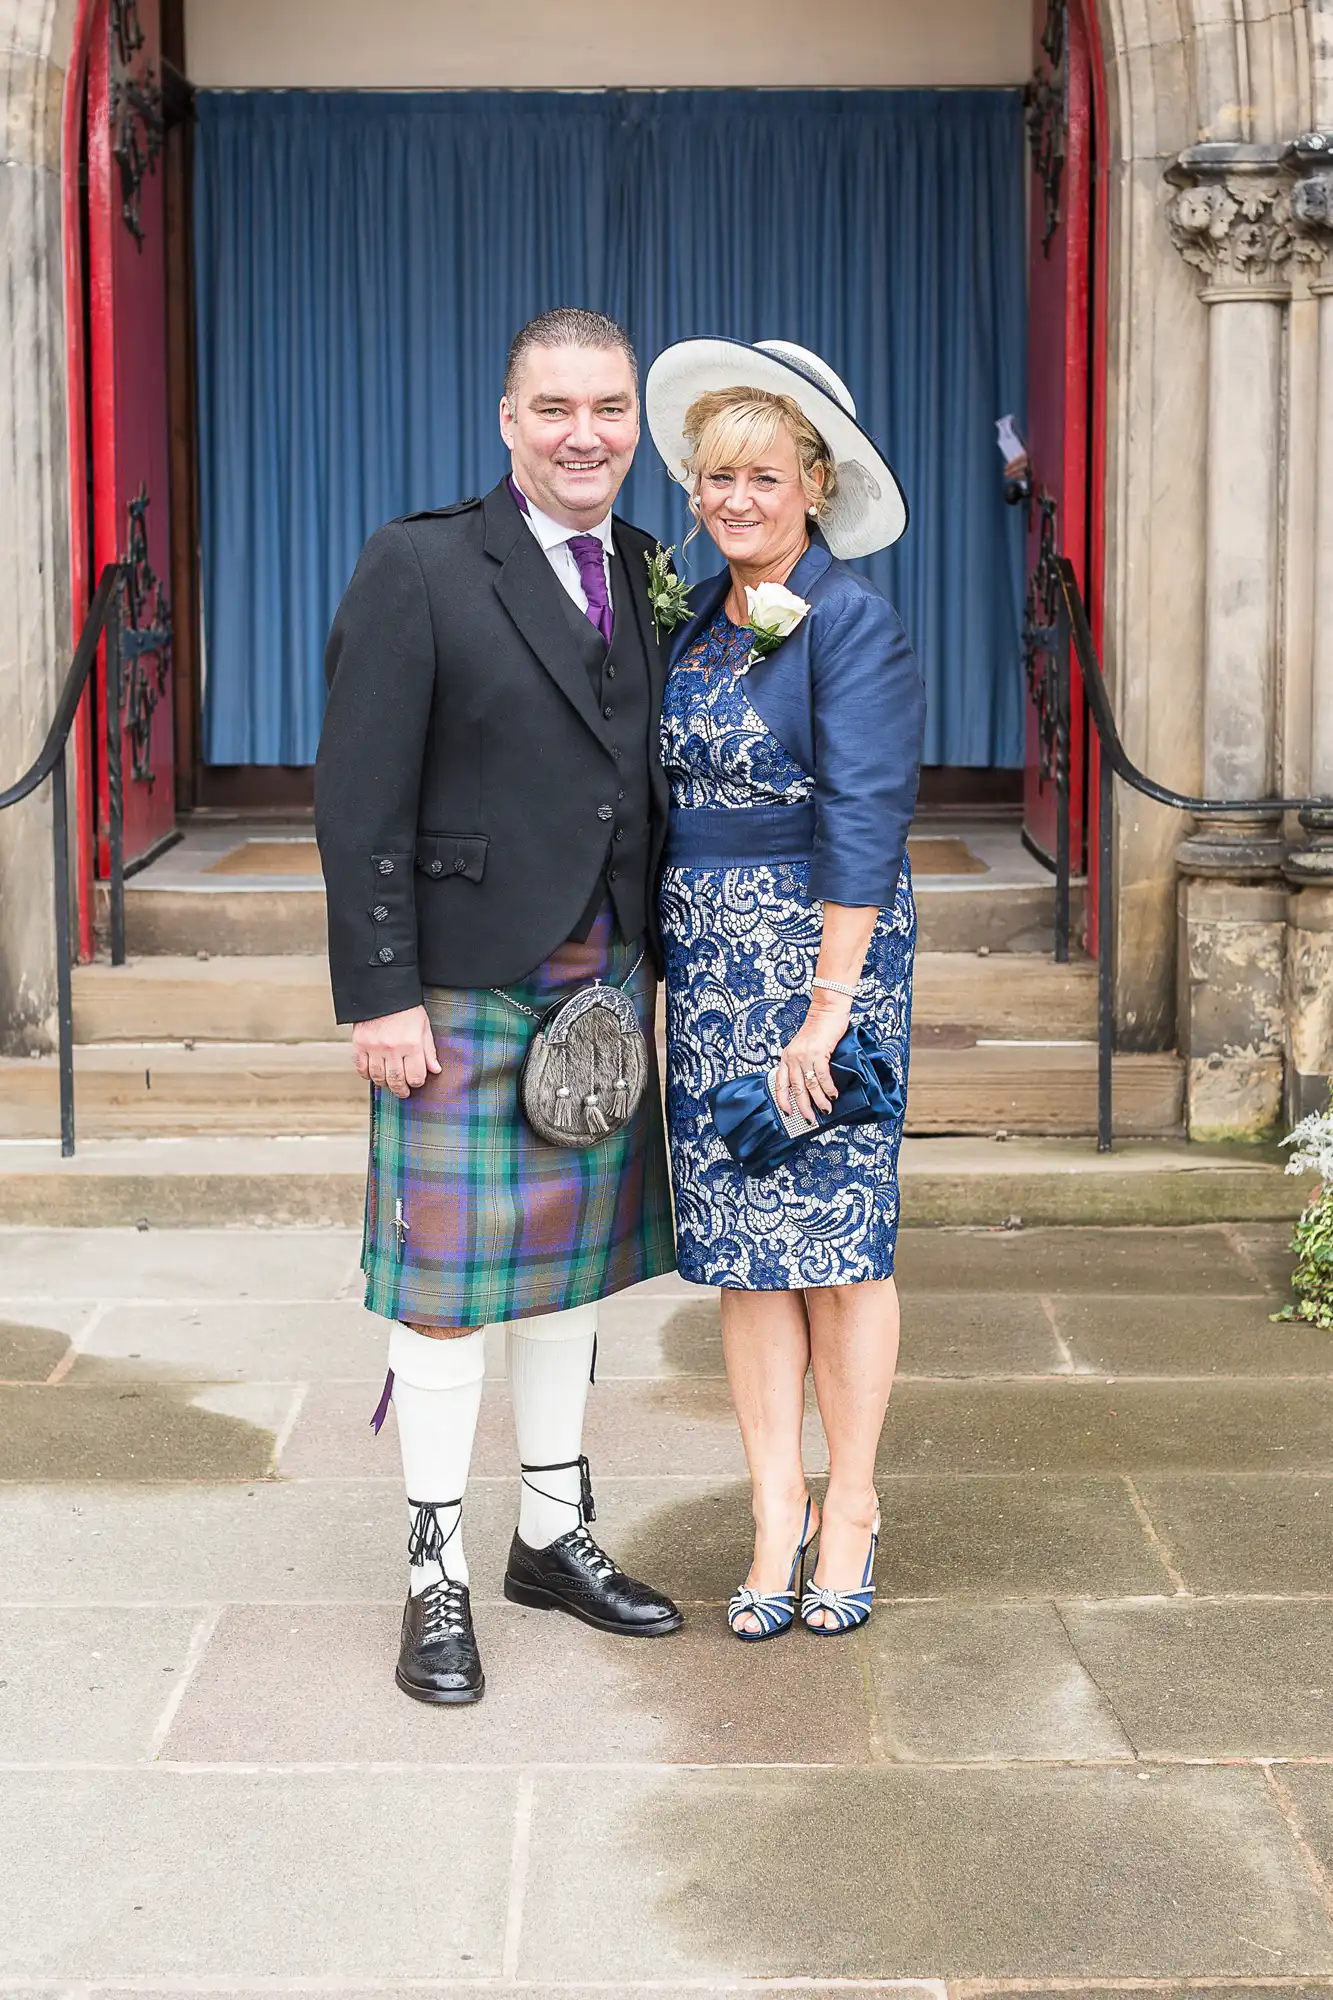 A man in a kilt and jacket with a woman in a blue dress and hat, both smiling, standing in front of a church entrance with blue doors.